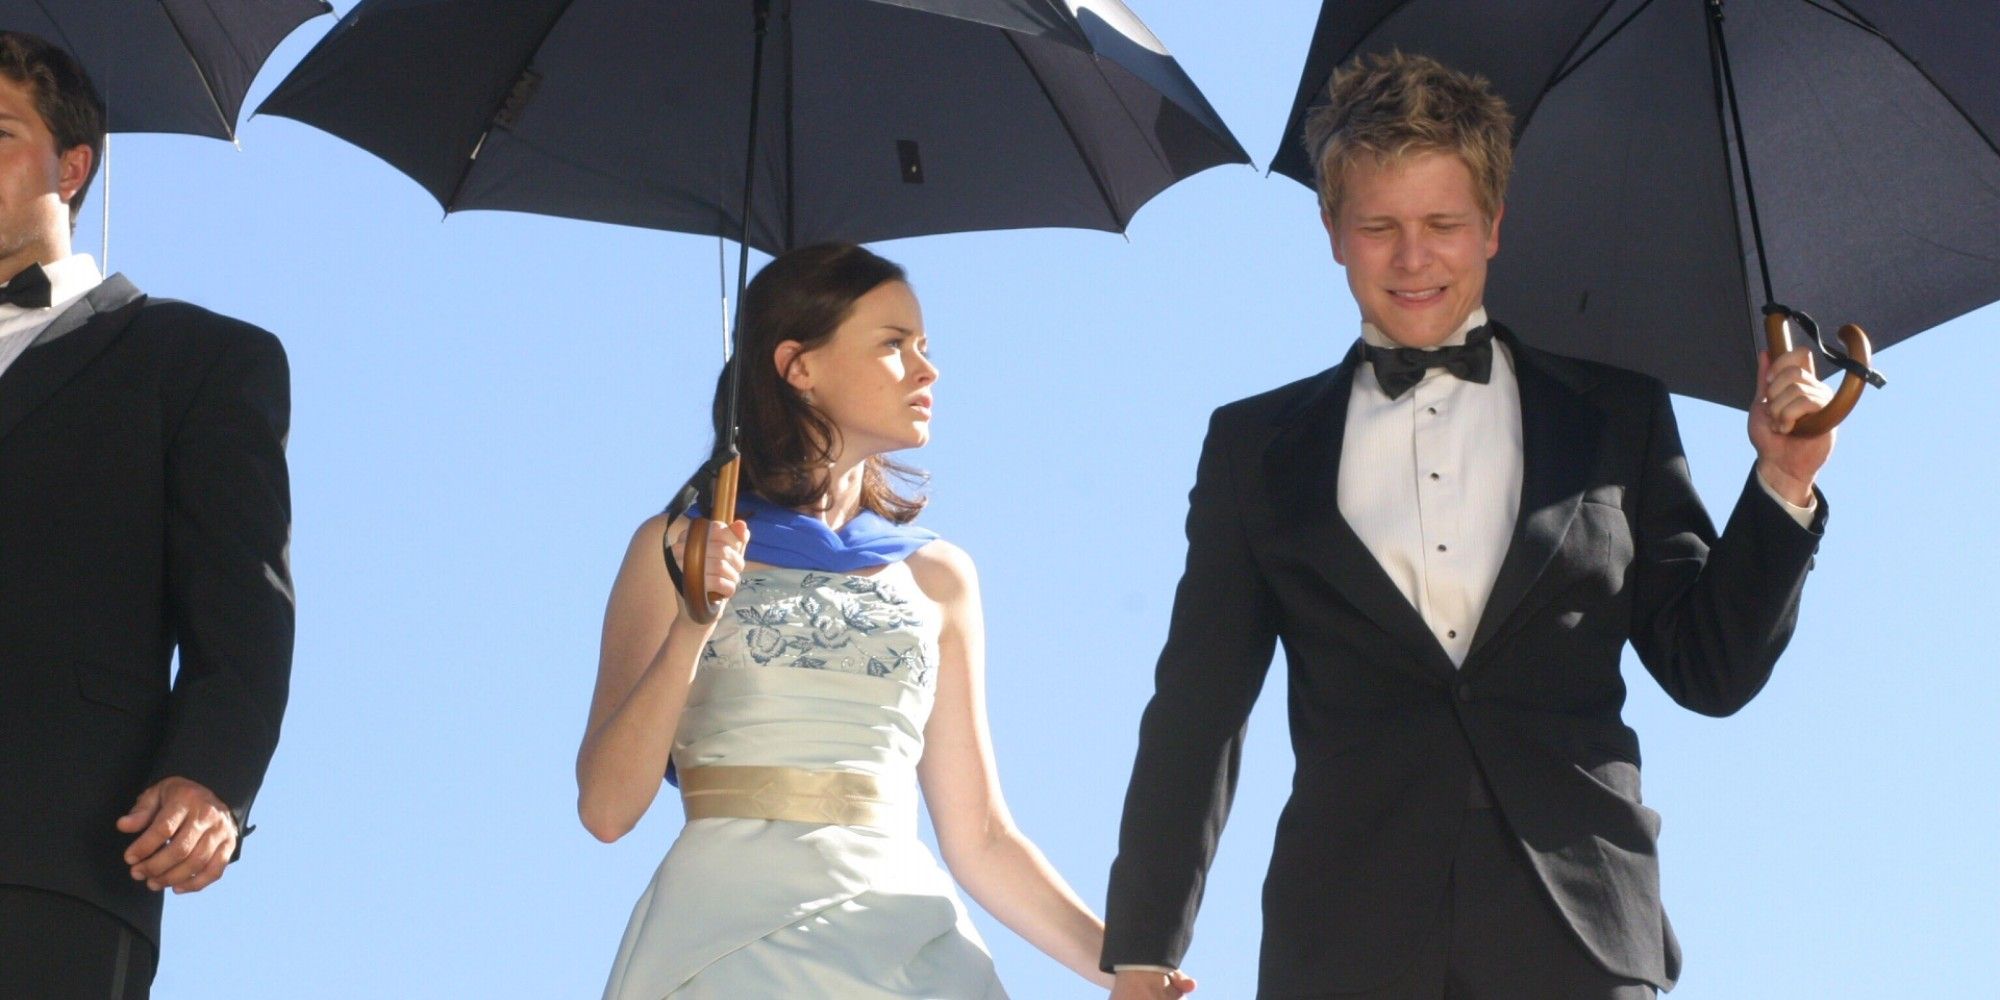 Rory And Logan With Umbrellas In Gilmore Girls